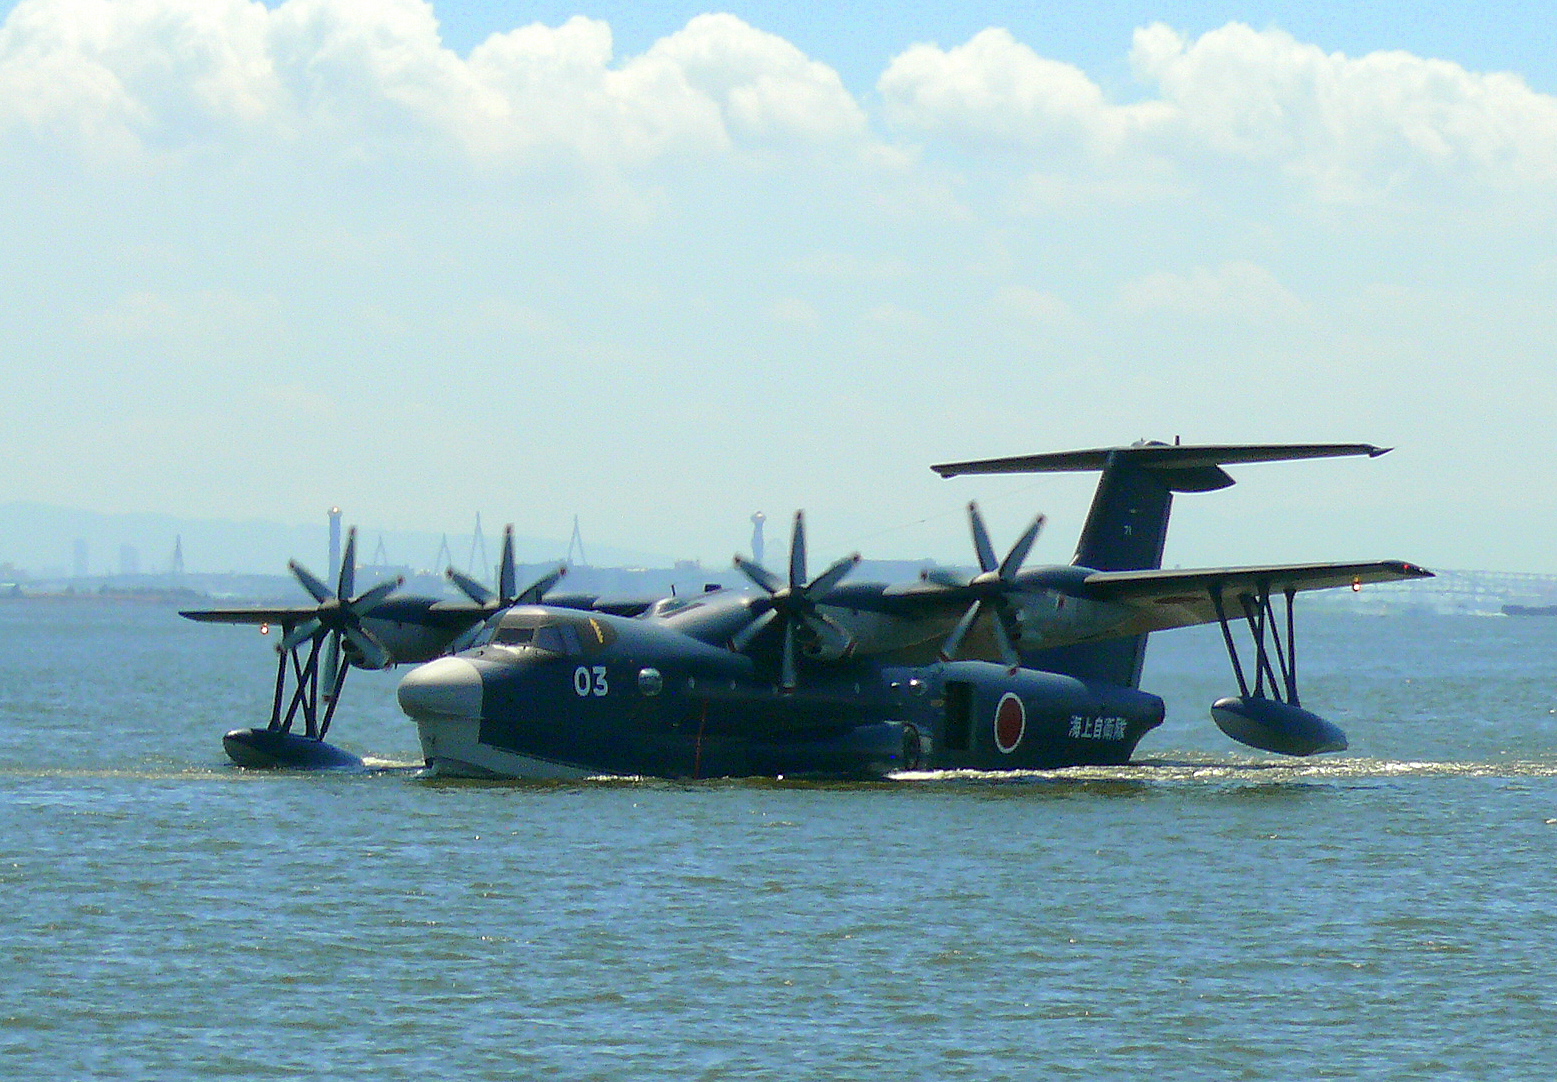 A ShinMaywa US-2 flying boat of the Japanese Self Defense Force off the coast of Japan, near Hansin Base.

Image in the public domain
Source: Wikimedia Commons